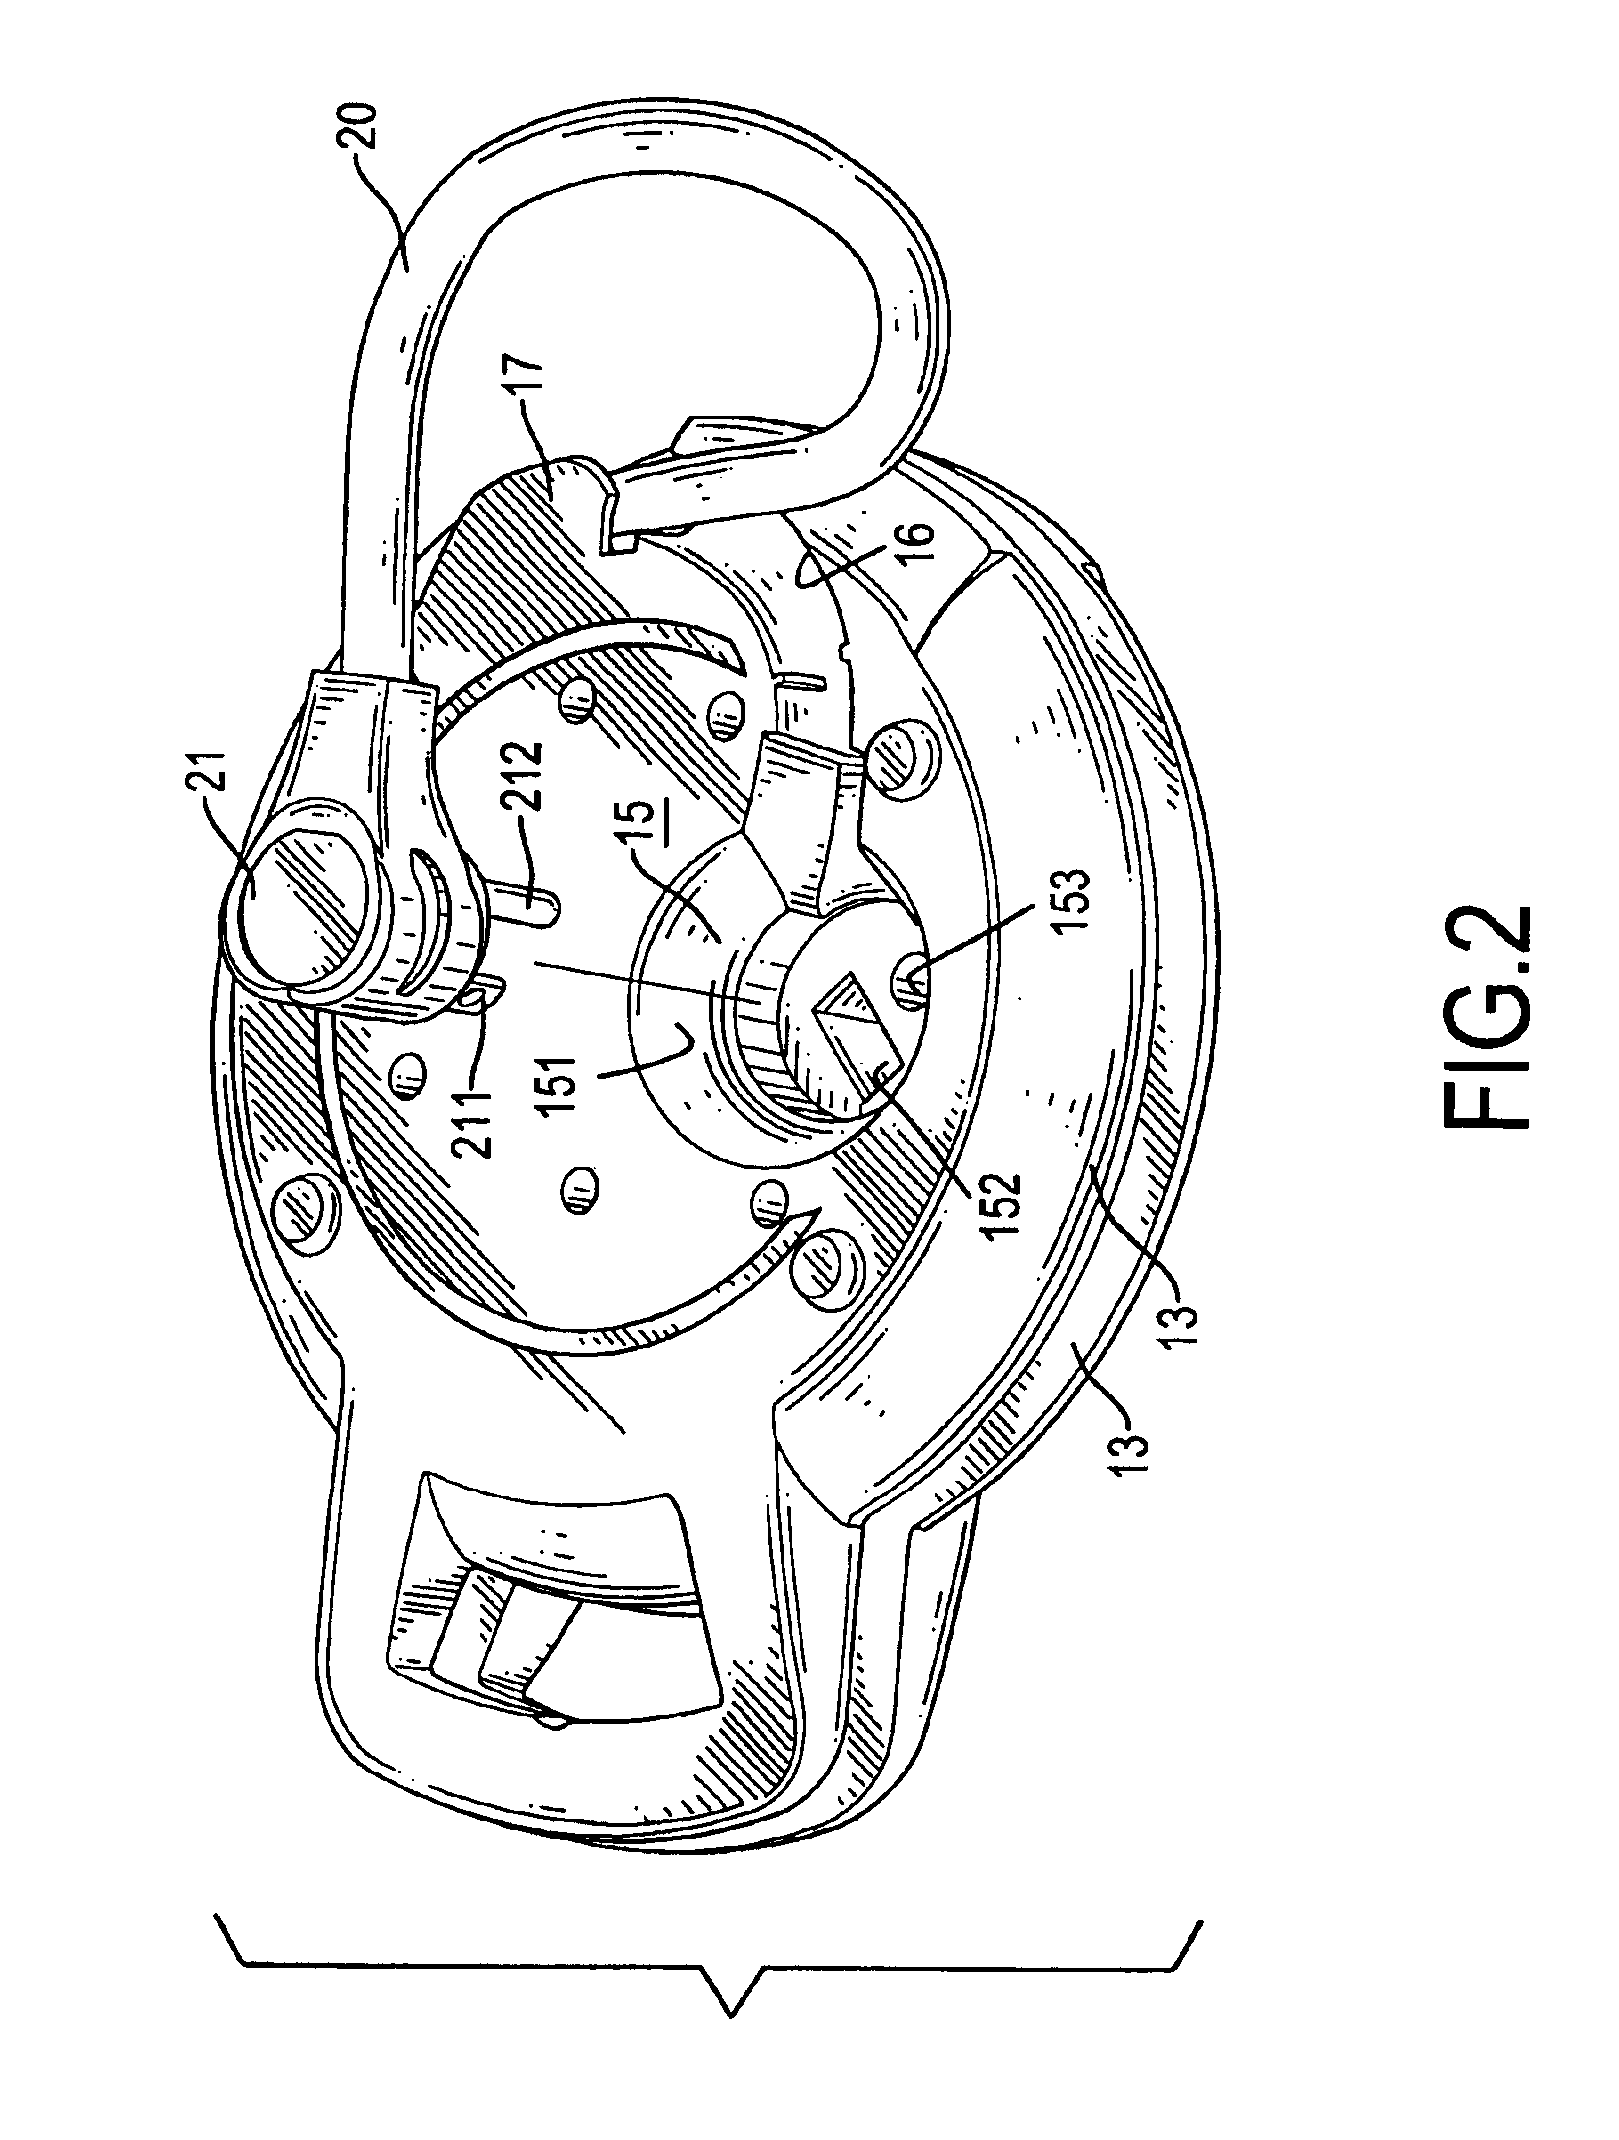 Retractable extension cord housing having a low-profile plug holder